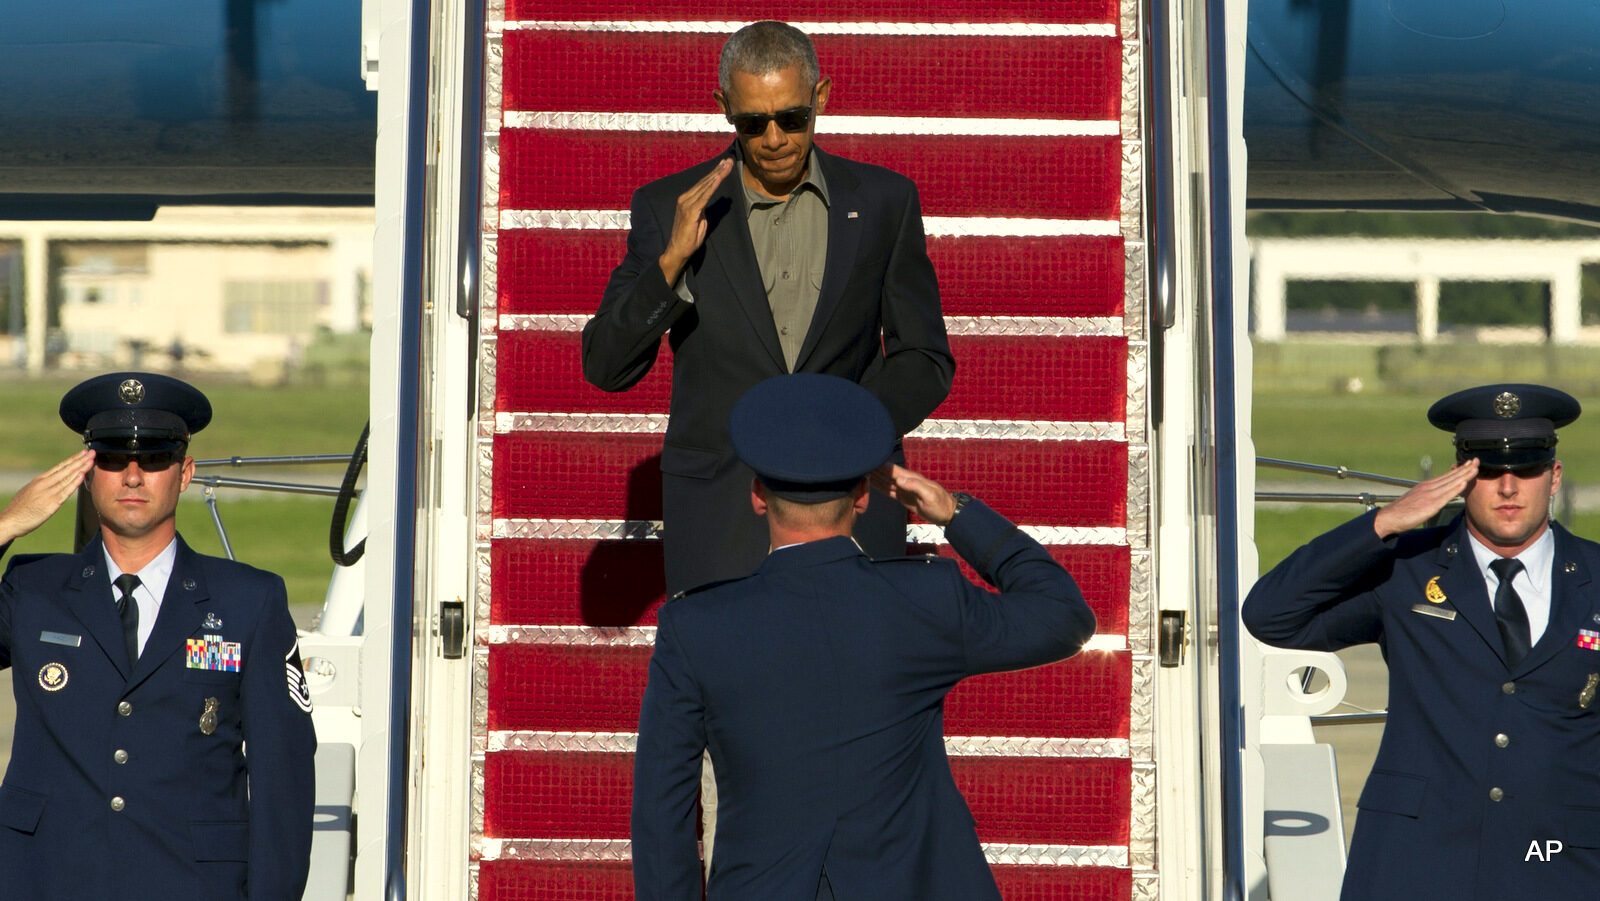 President Barack Obama salutes as he walks down the stairs from Air Force One upon his arrival at Andrews Air Force Base, Aug. 23, 2016.